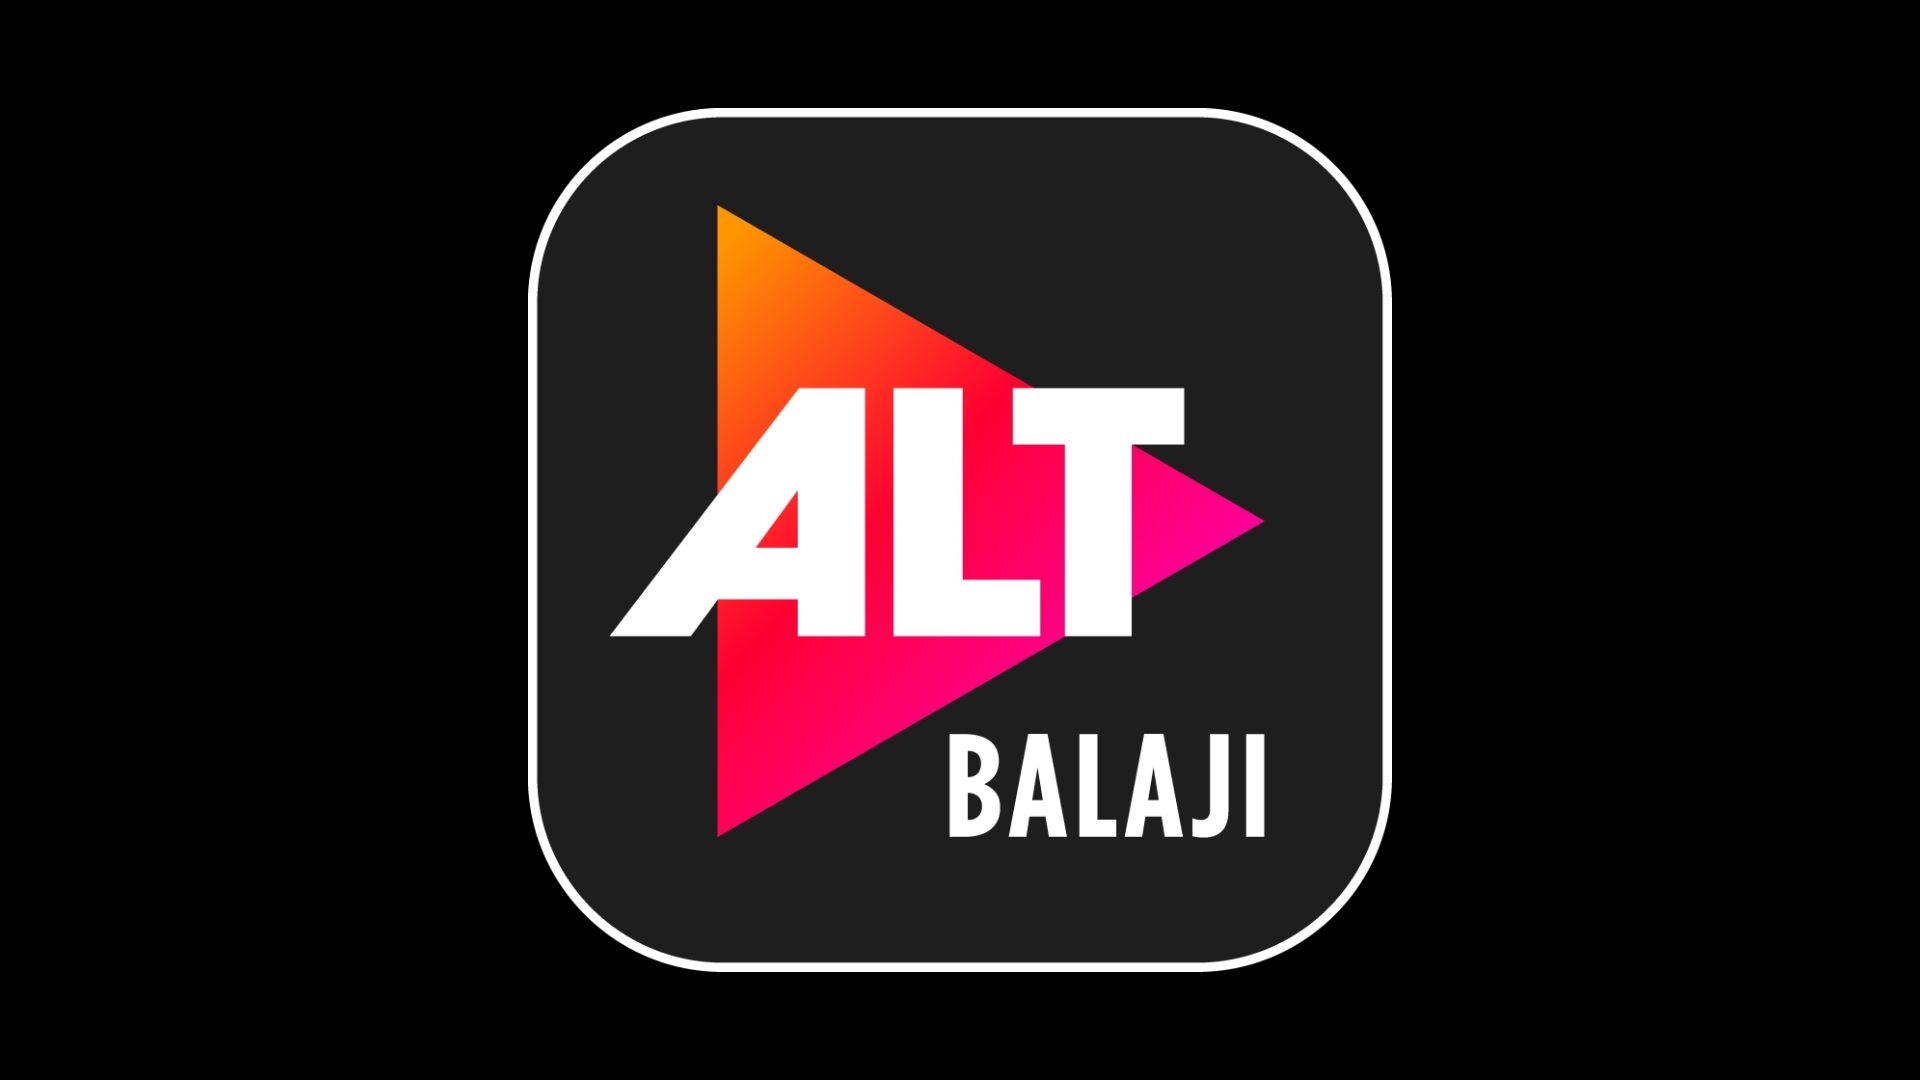 ALTBalaji launches quirky #StayALT campaign about staying safe at home